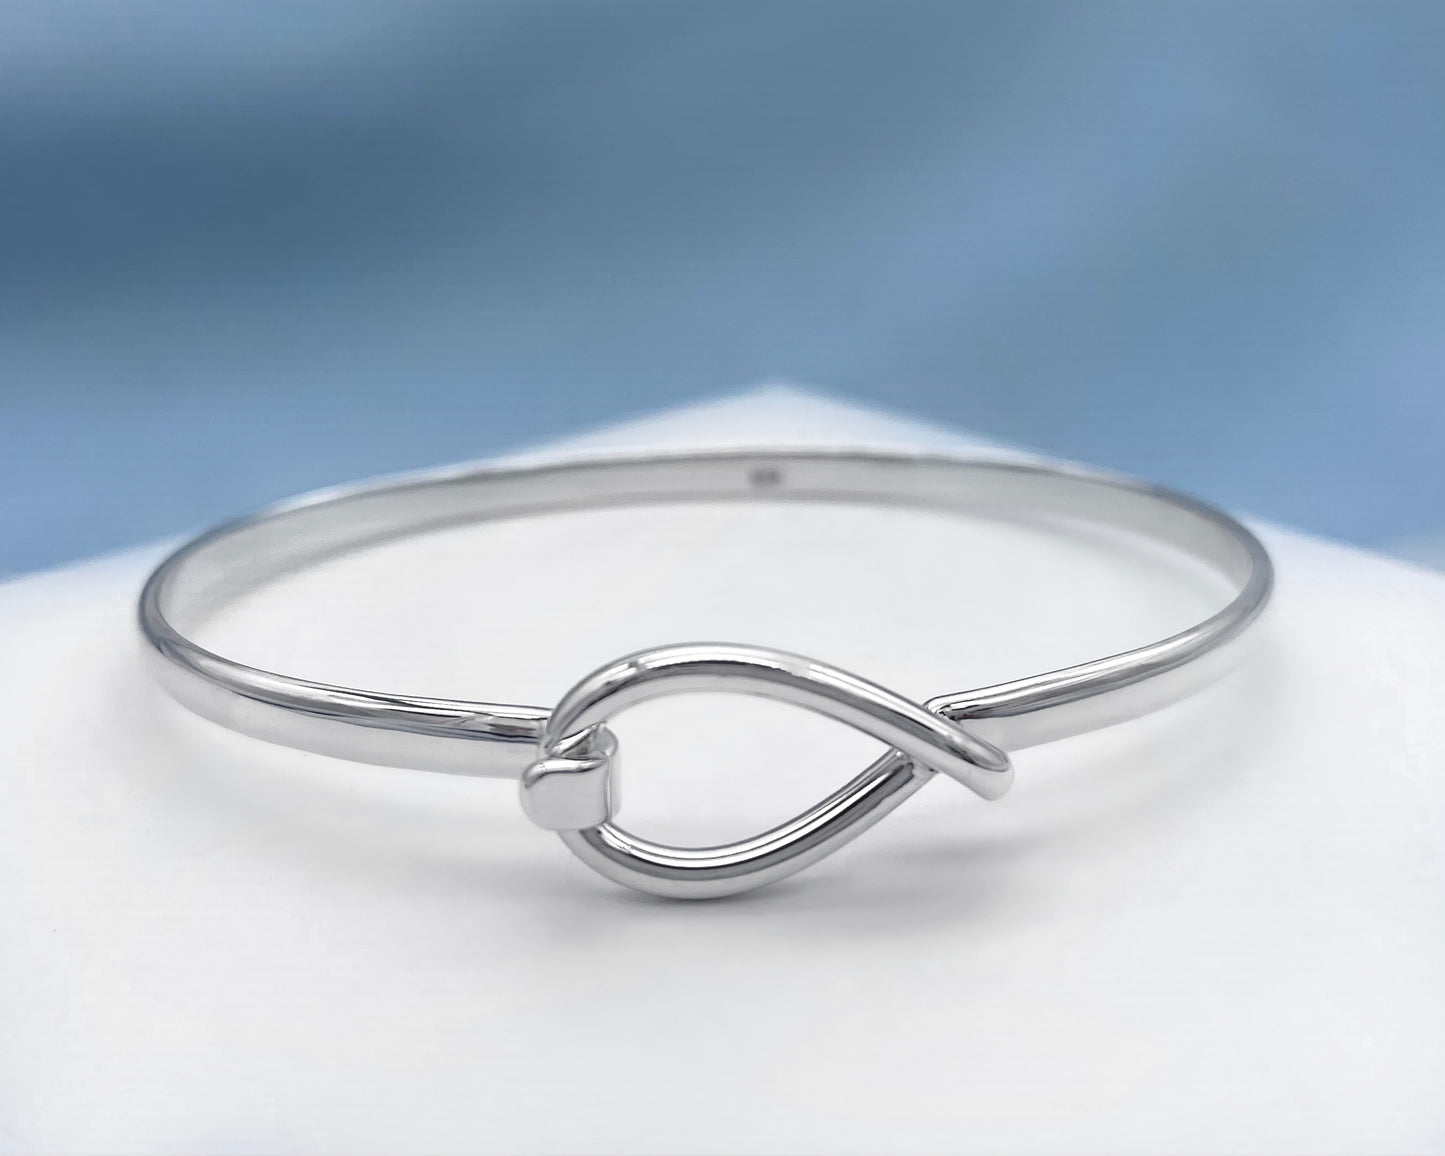 Fish Clasp Opening Silver Bangle Larger Wrist